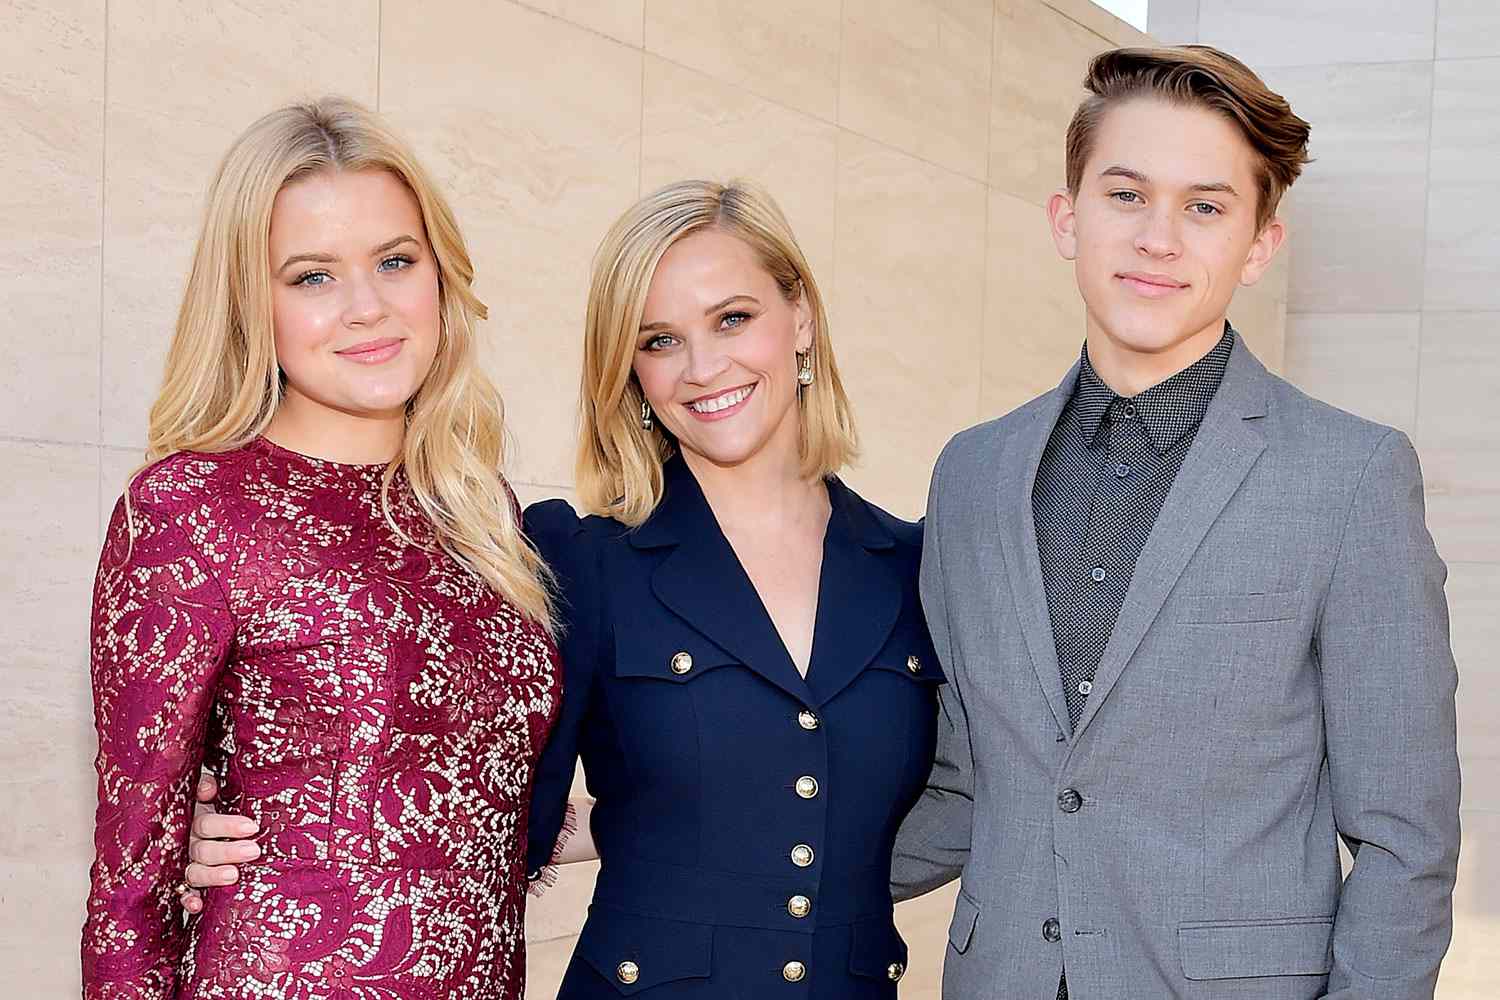 HOLLYWOOD, CALIFORNIA - DECEMBER 11: (l-R) Ava Elizabeth Phillippe, honoree Reese Witherspoon, and Deacon Reese Phillippe attend The Hollywood Reporter's Power 100 Women in Entertainment at Milk Studios on December 11, 2019 in Hollywood, California. (Photo by Stefanie Keenan/Getty Images for The Hollywood Reporter)